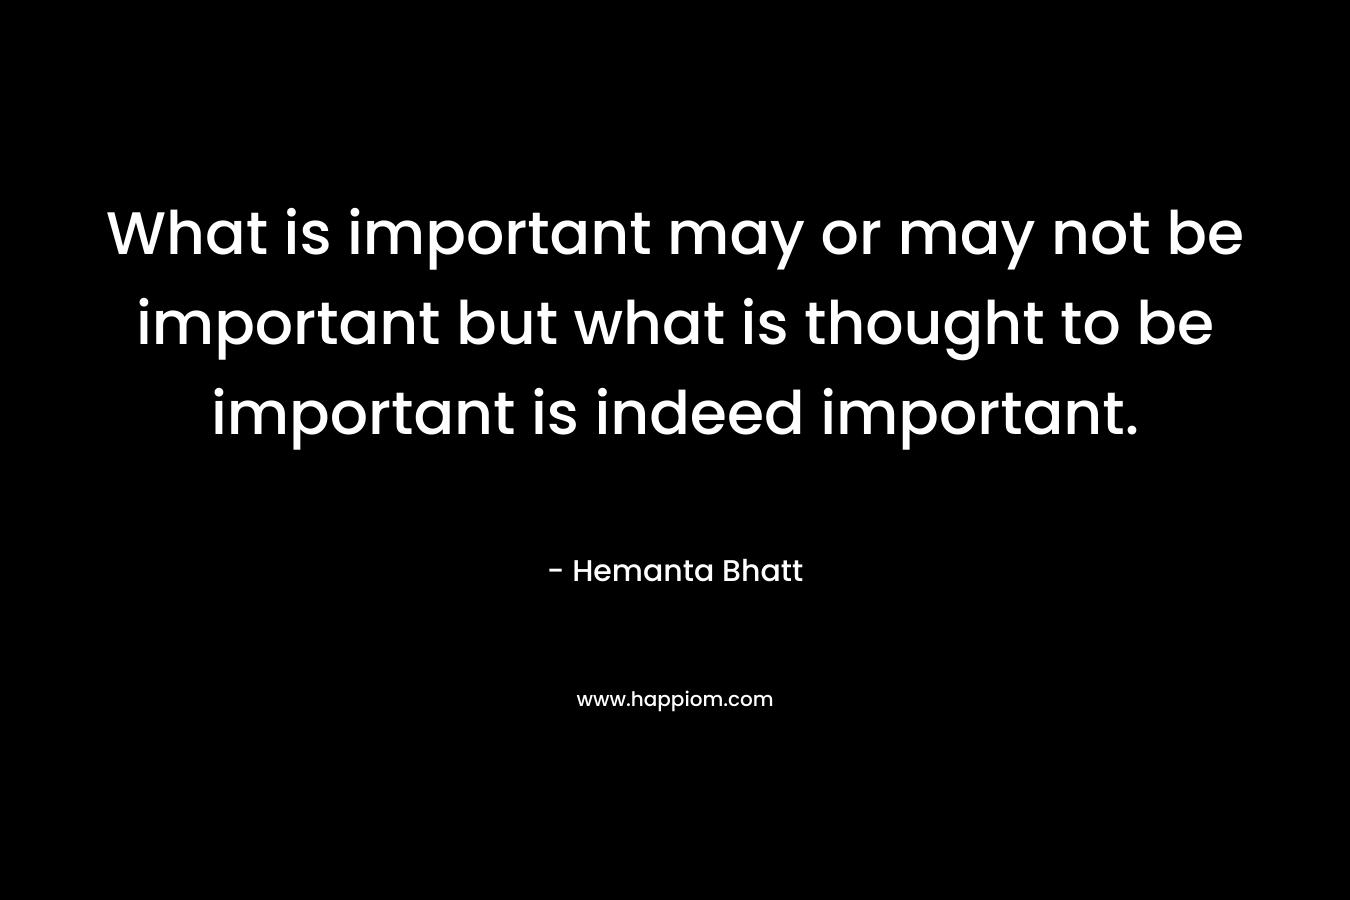 What is important may or may not be important but what is thought to be important is indeed important.